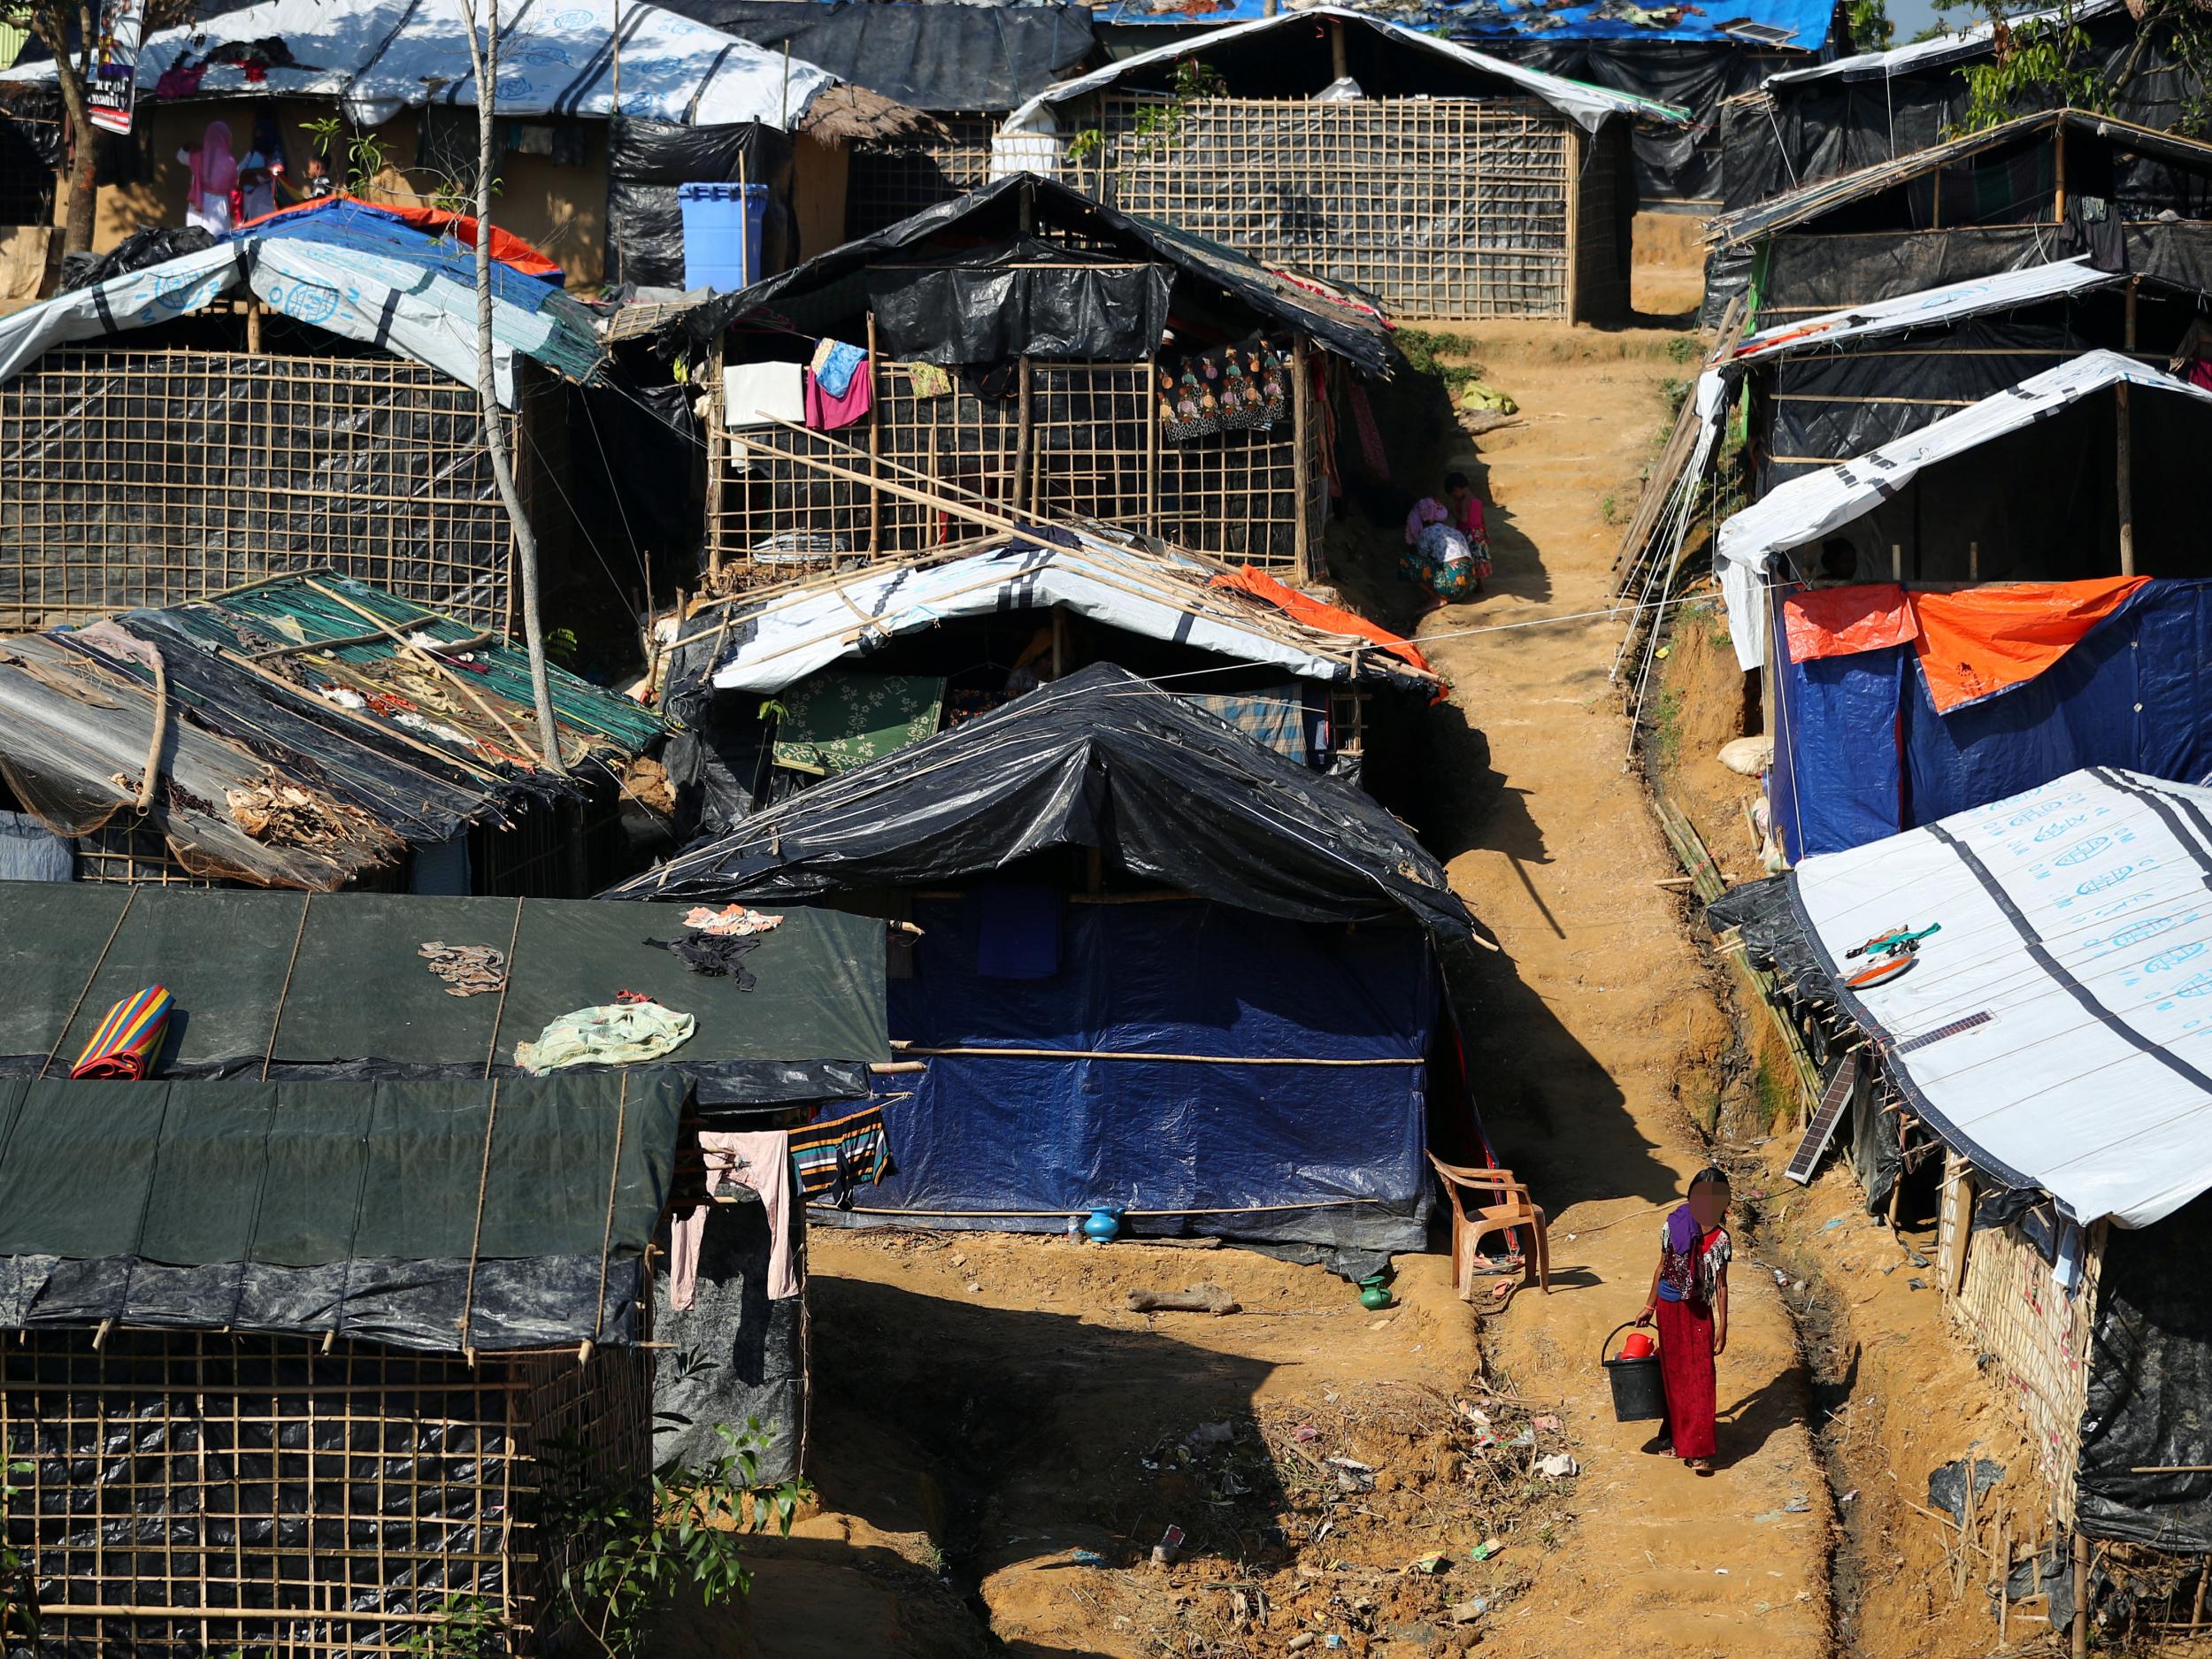 In Kutupalong Camp, Bangladesh, two whole families live together under a single piece of tarpaulin